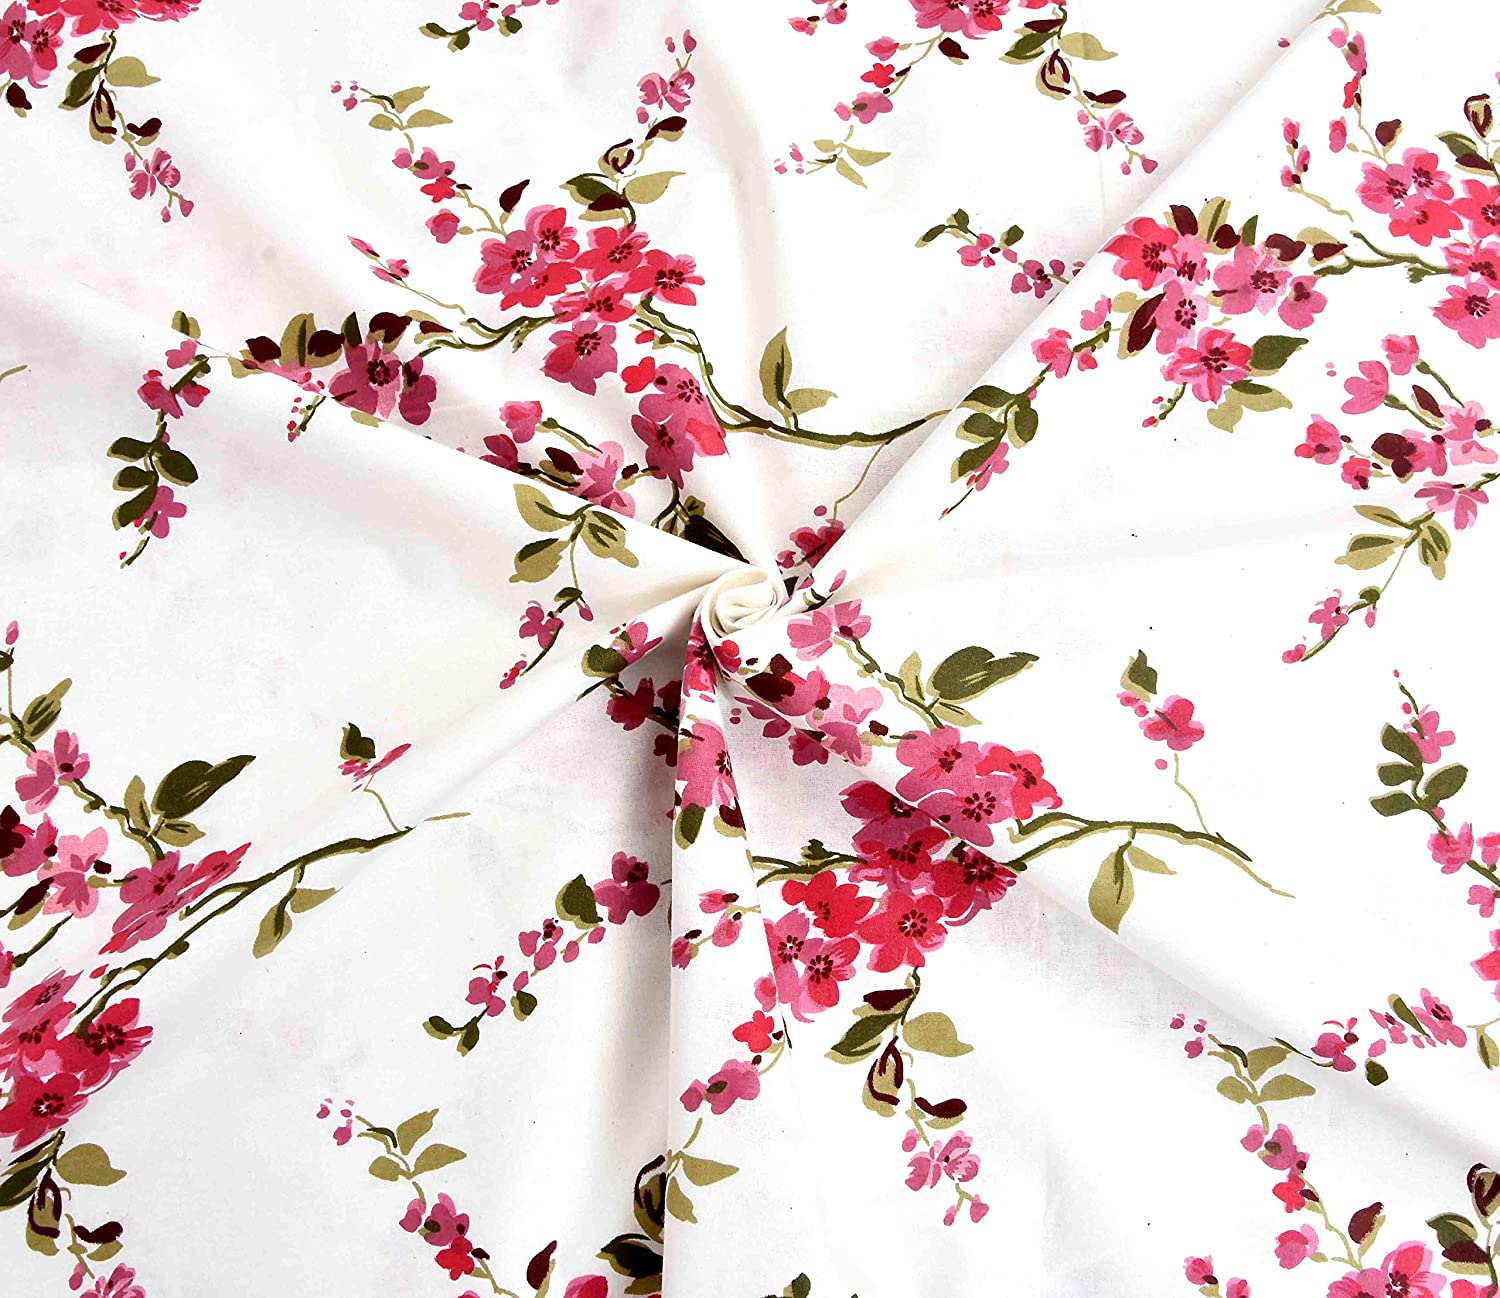 Pure Cotton 240 TC Double bedsheet in Red motif floral print